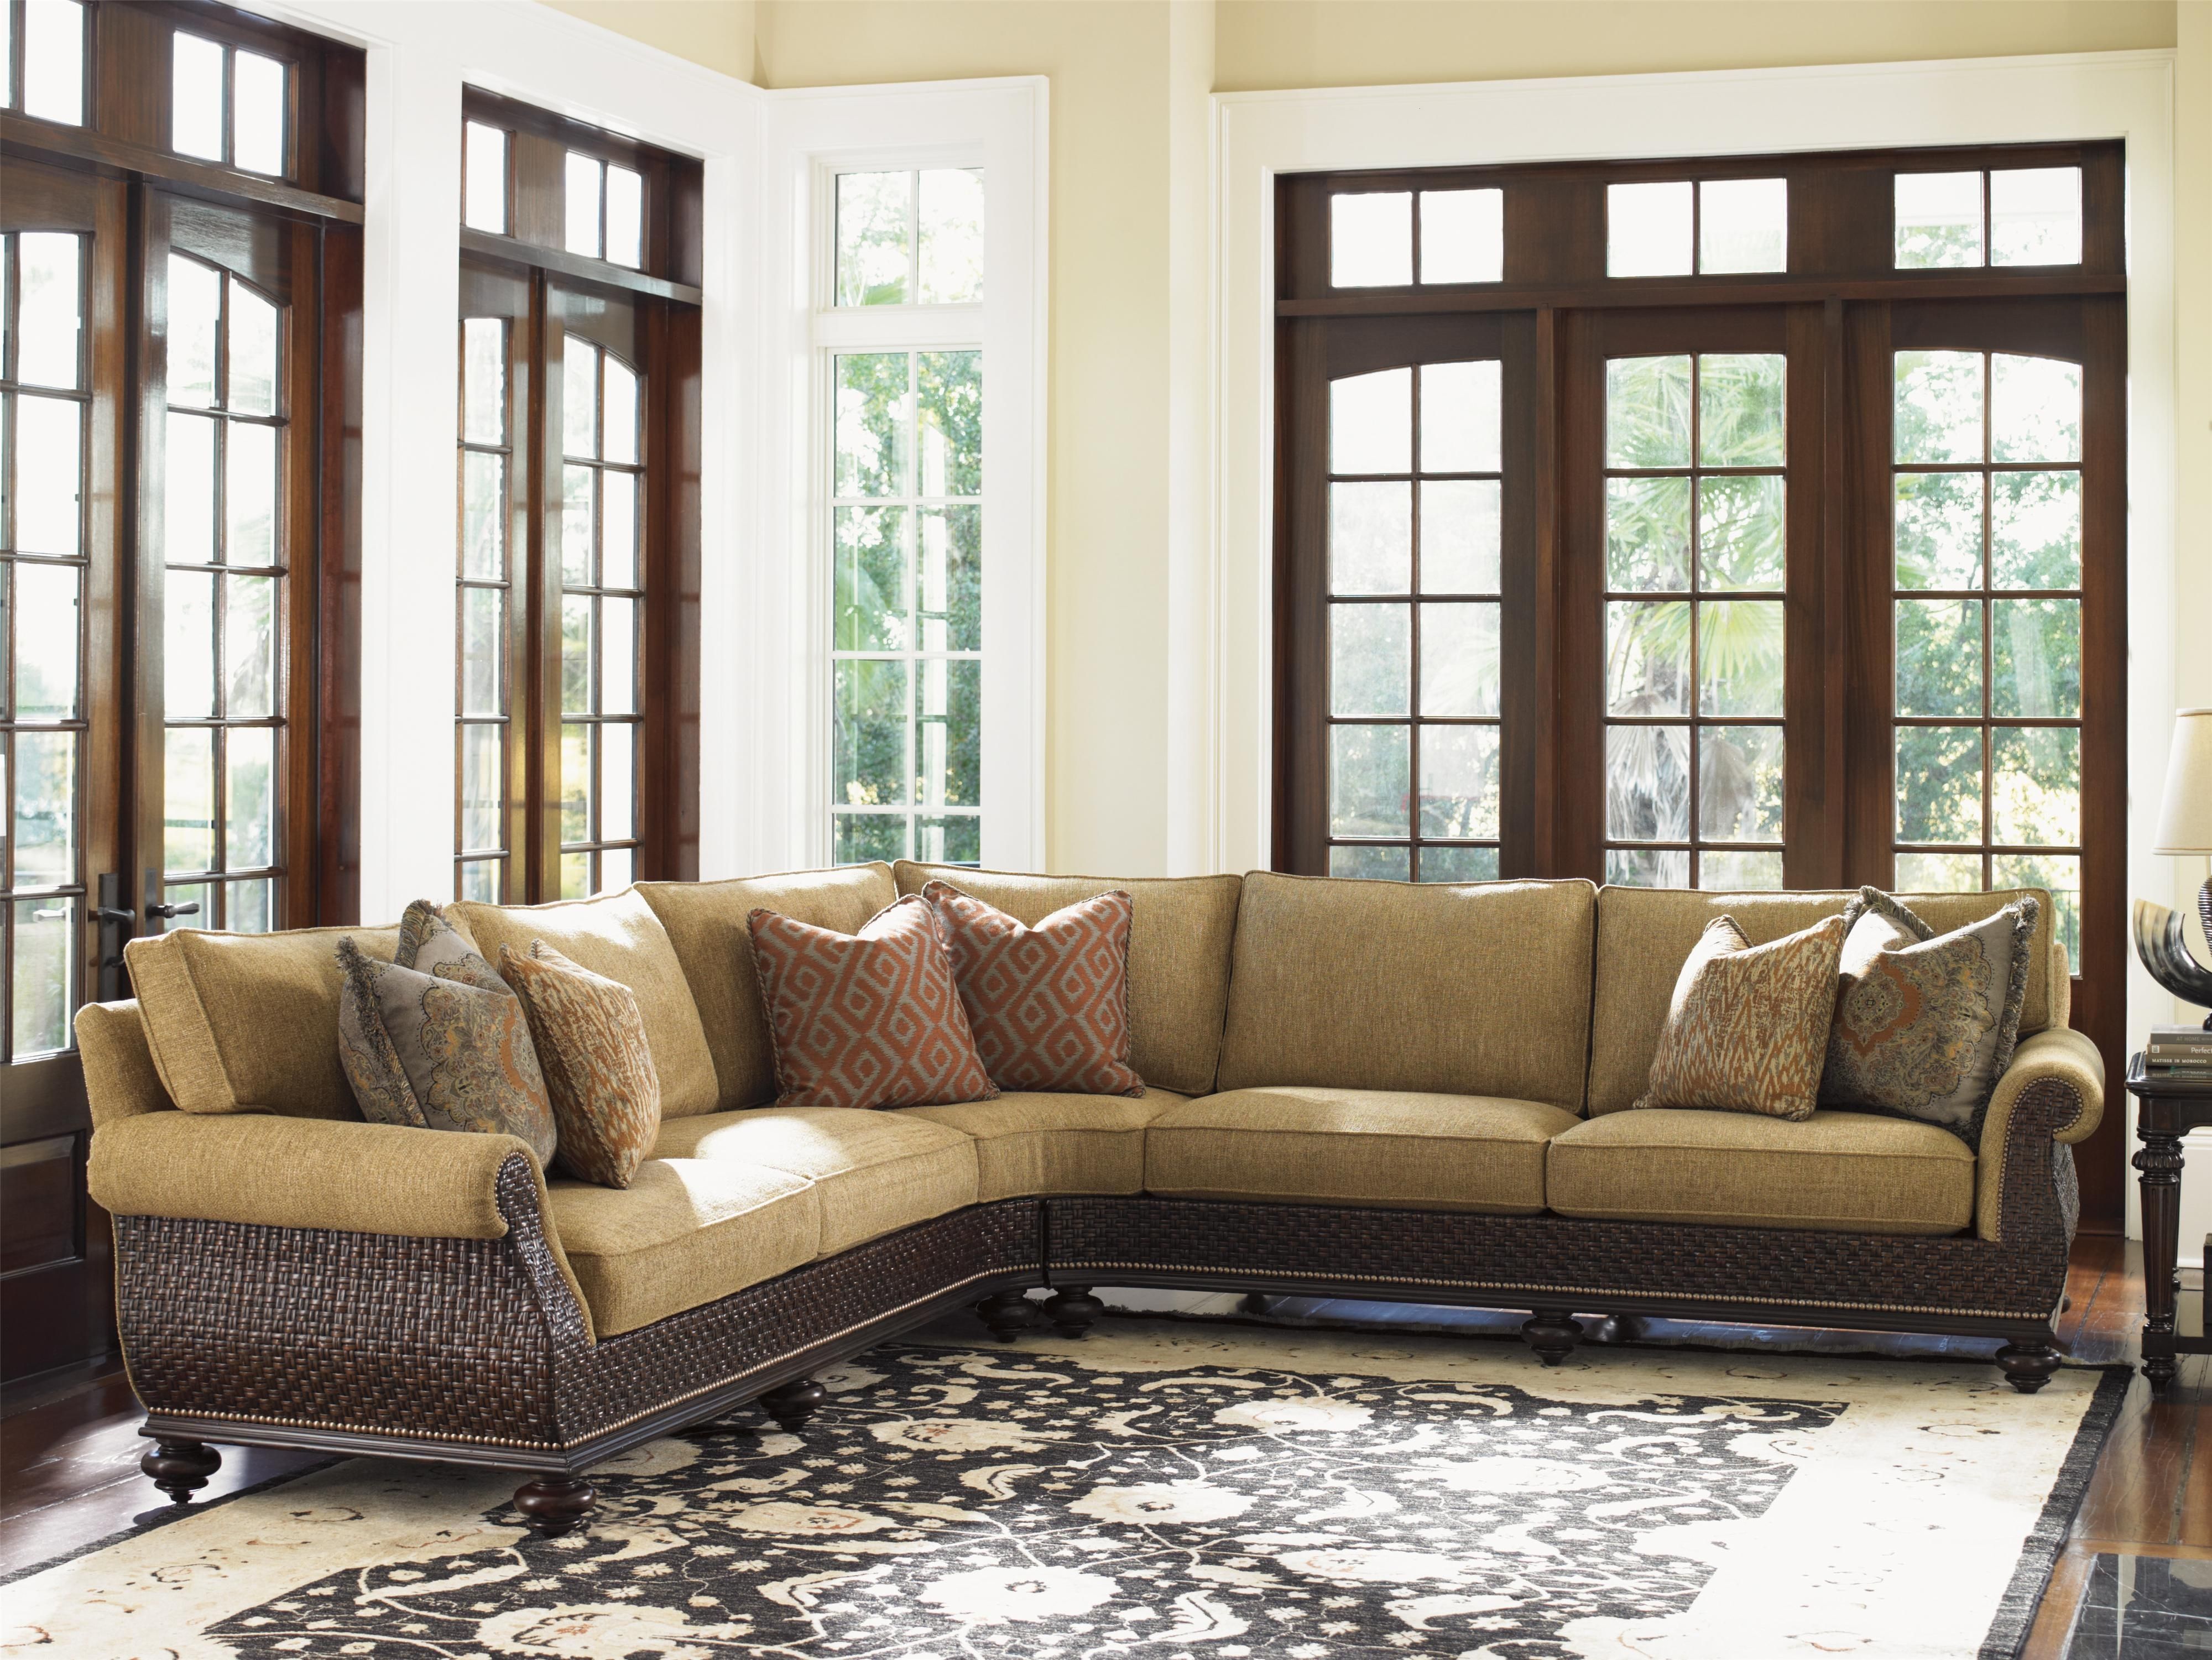 Tommy Bahama Home Island Traditions Westbury Sectional Sofa With With Regard To Gainesville Fl Sectional Sofas (View 4 of 10)